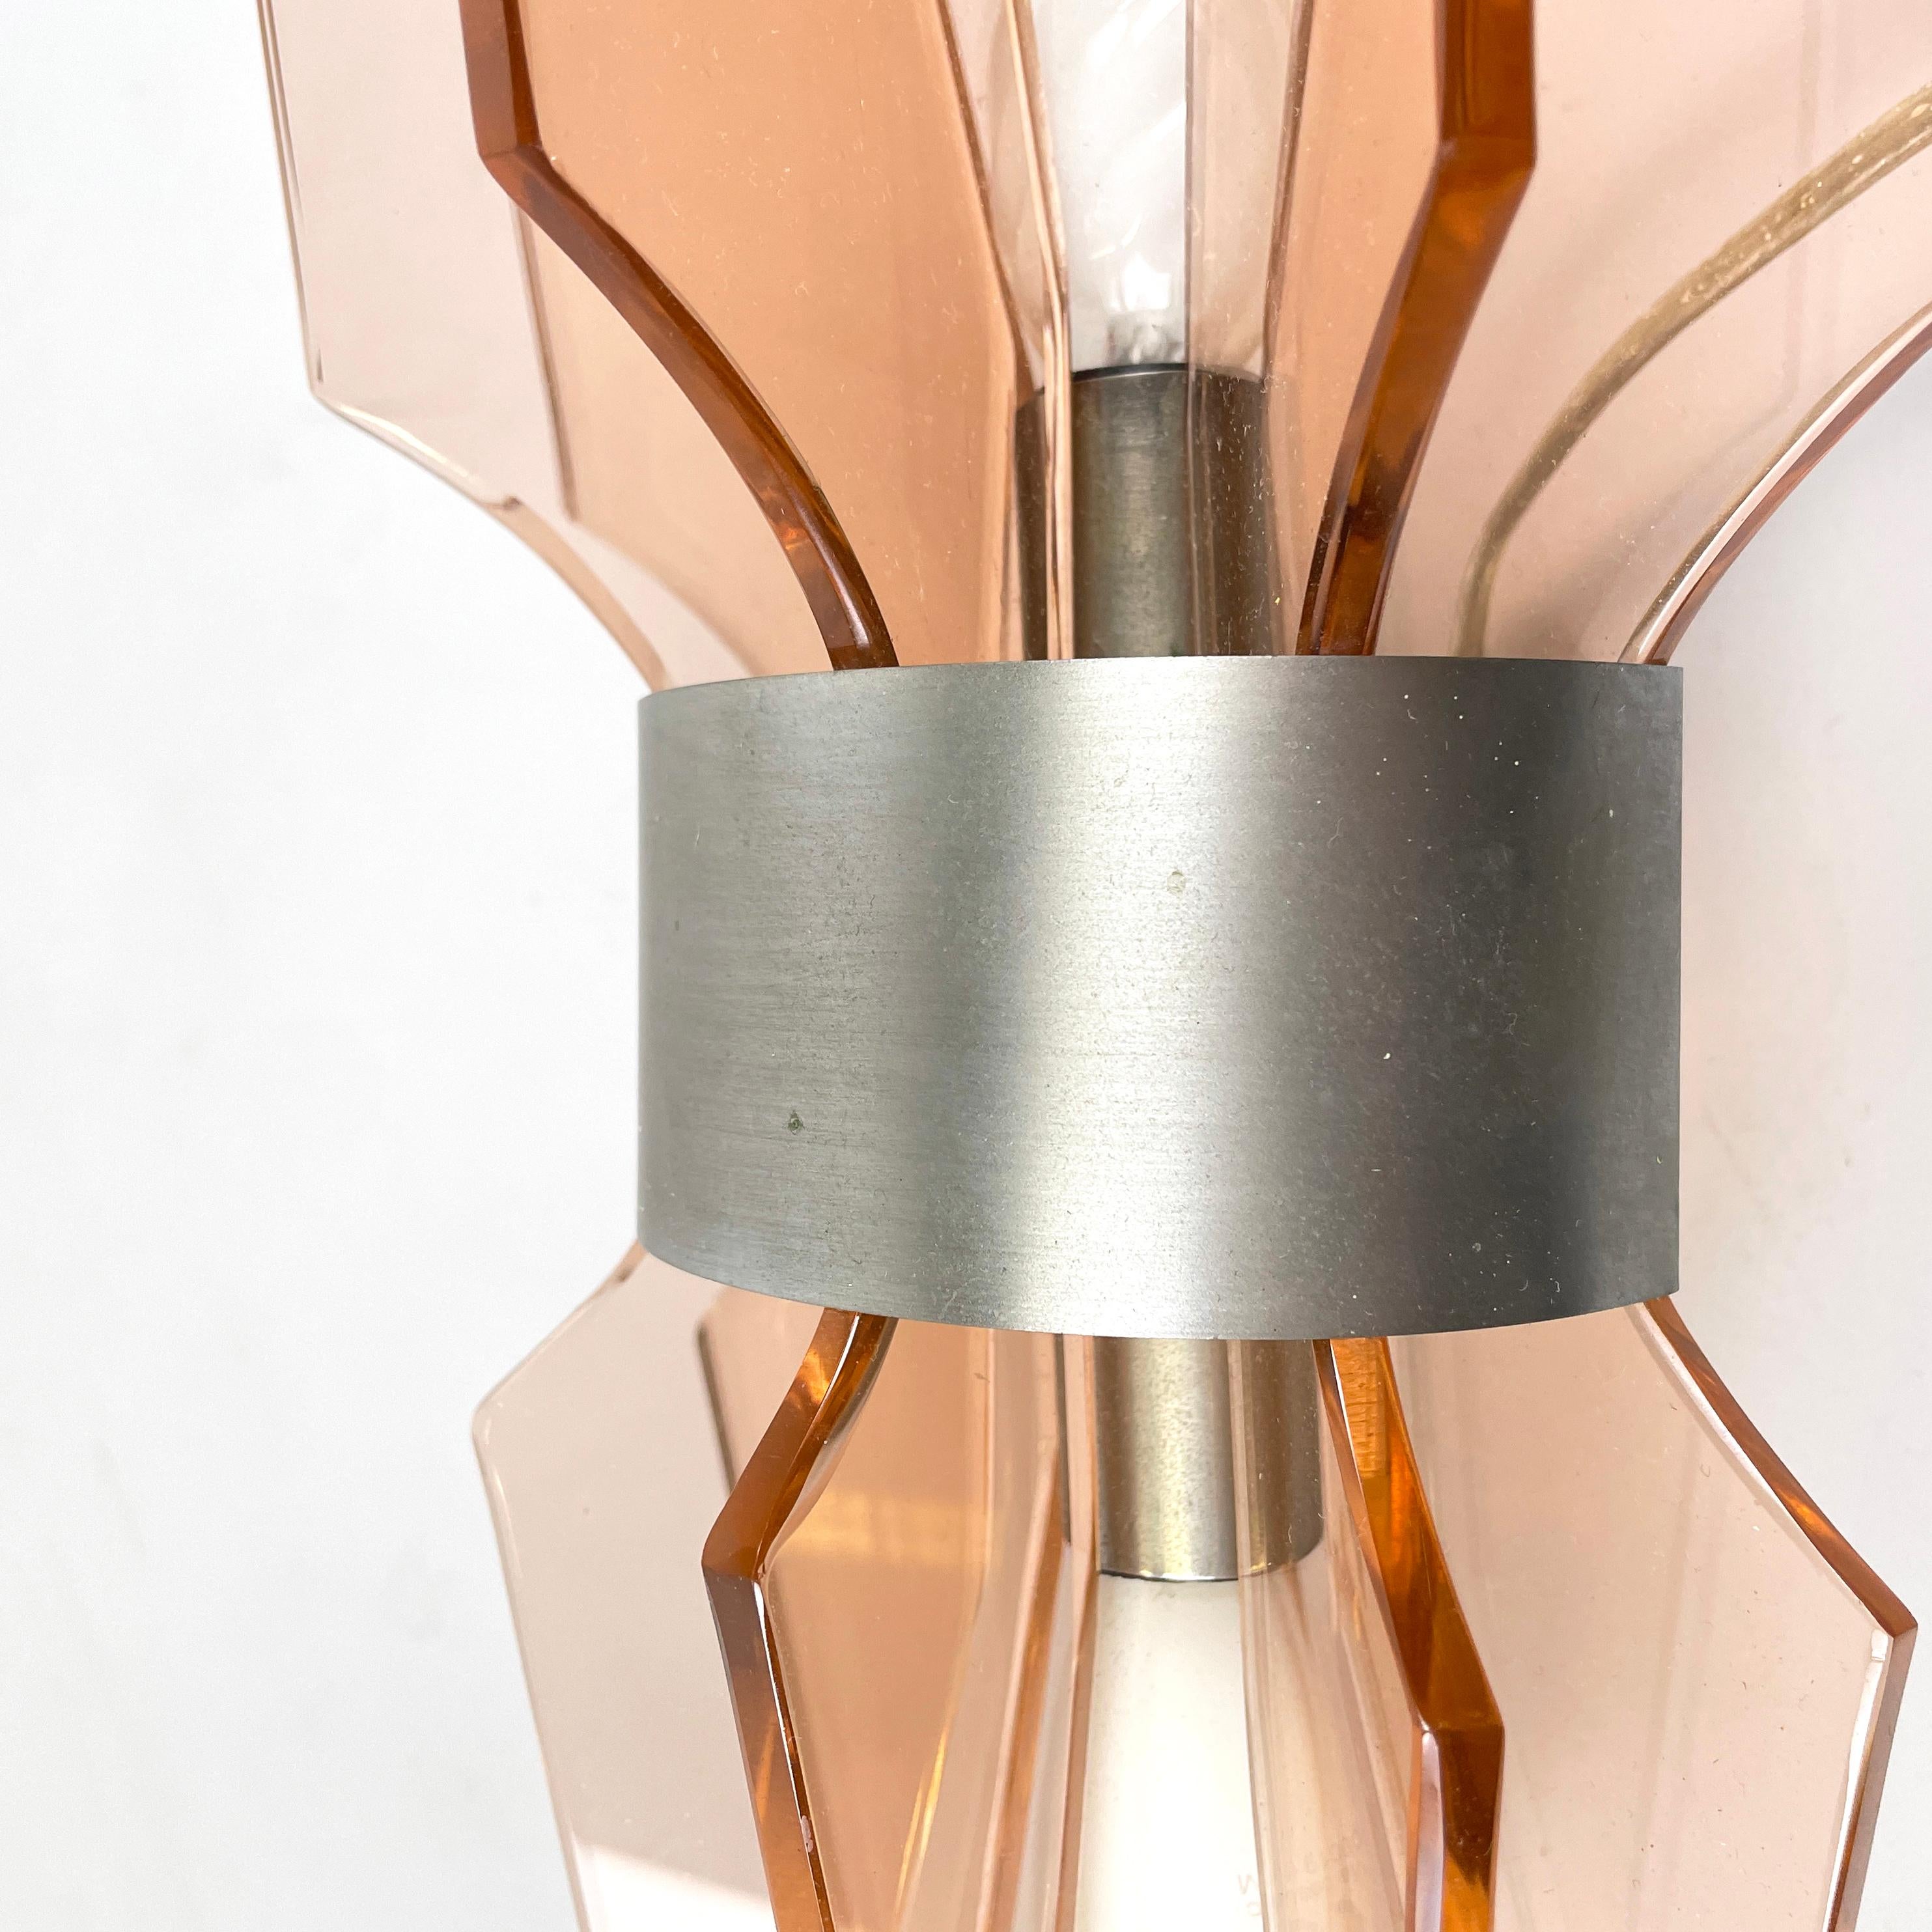 Italian mid-century modern Wall lamps in peach pink glass and metal, 1960s 3